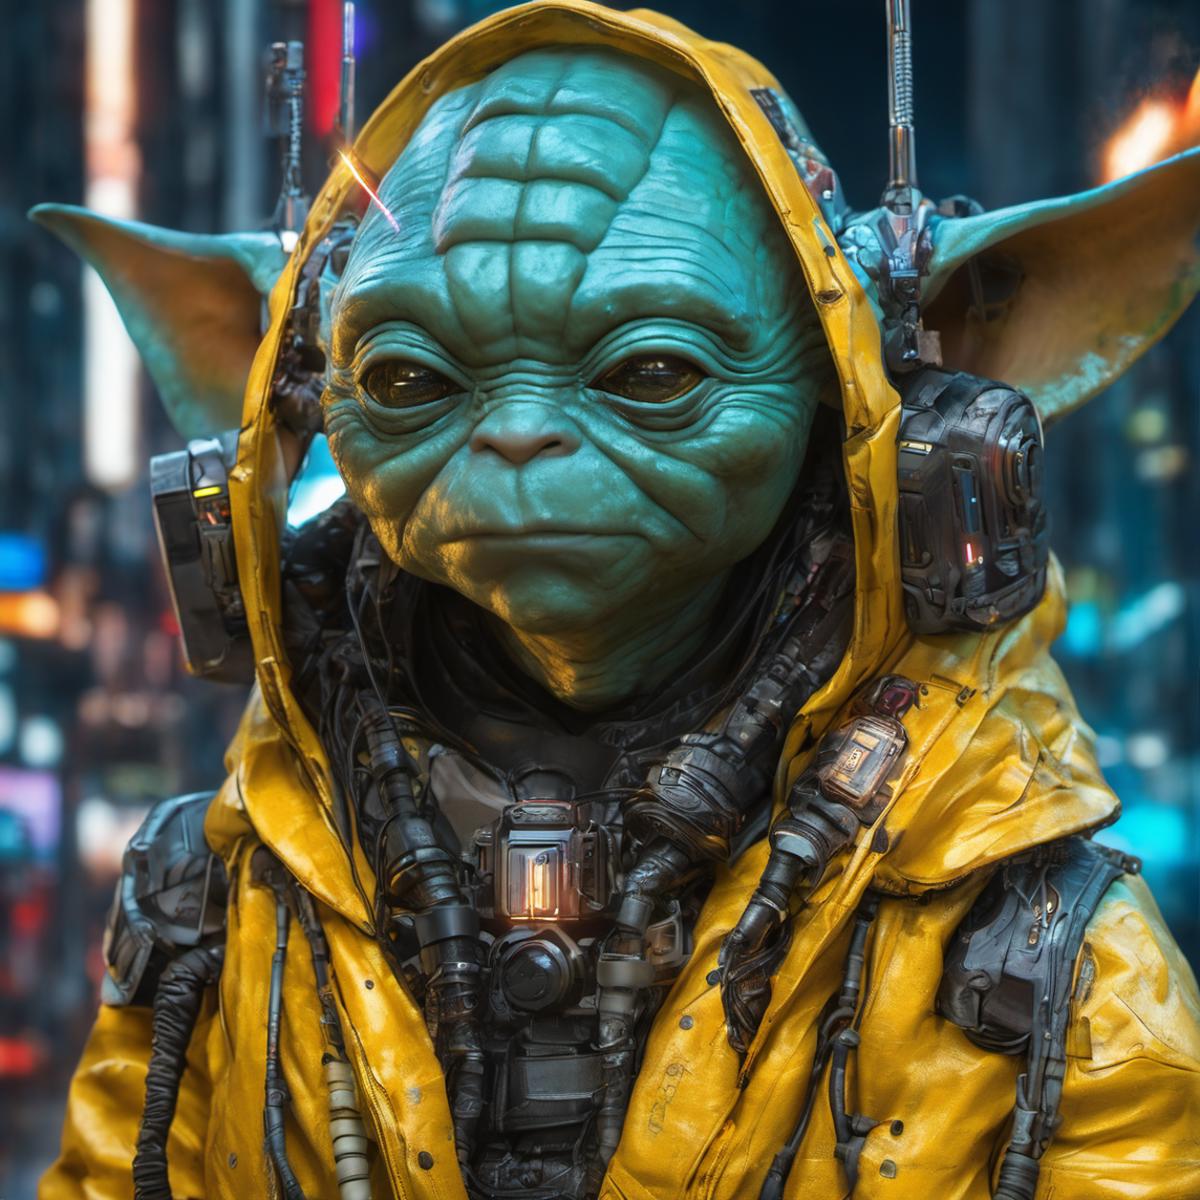 A Yellow Jedi Master with a Green Head, Electronic Gadgets, and Circuitry.